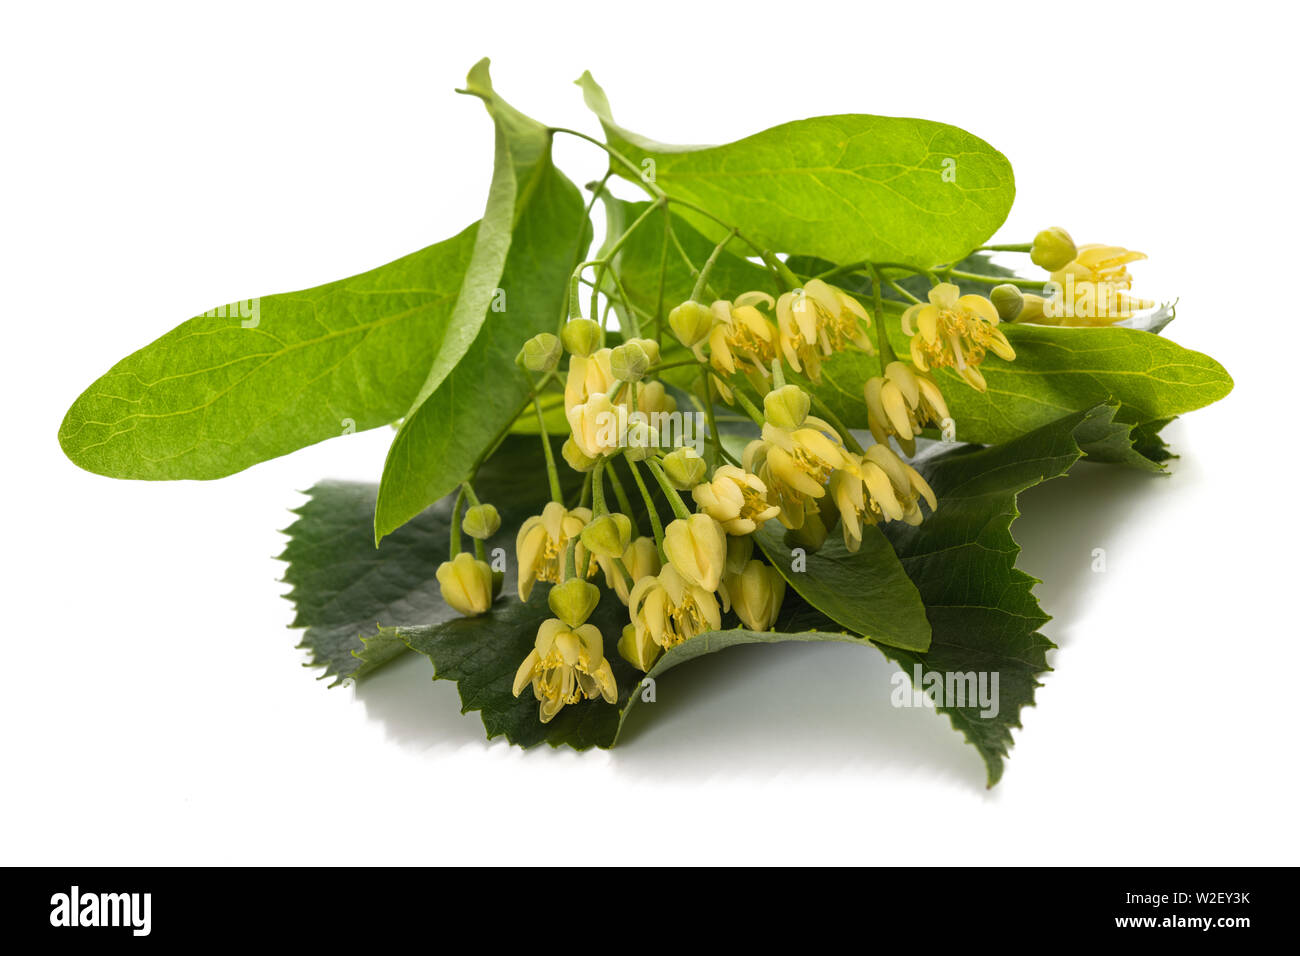 linden  leaf with flowers isolated on white background Stock Photo